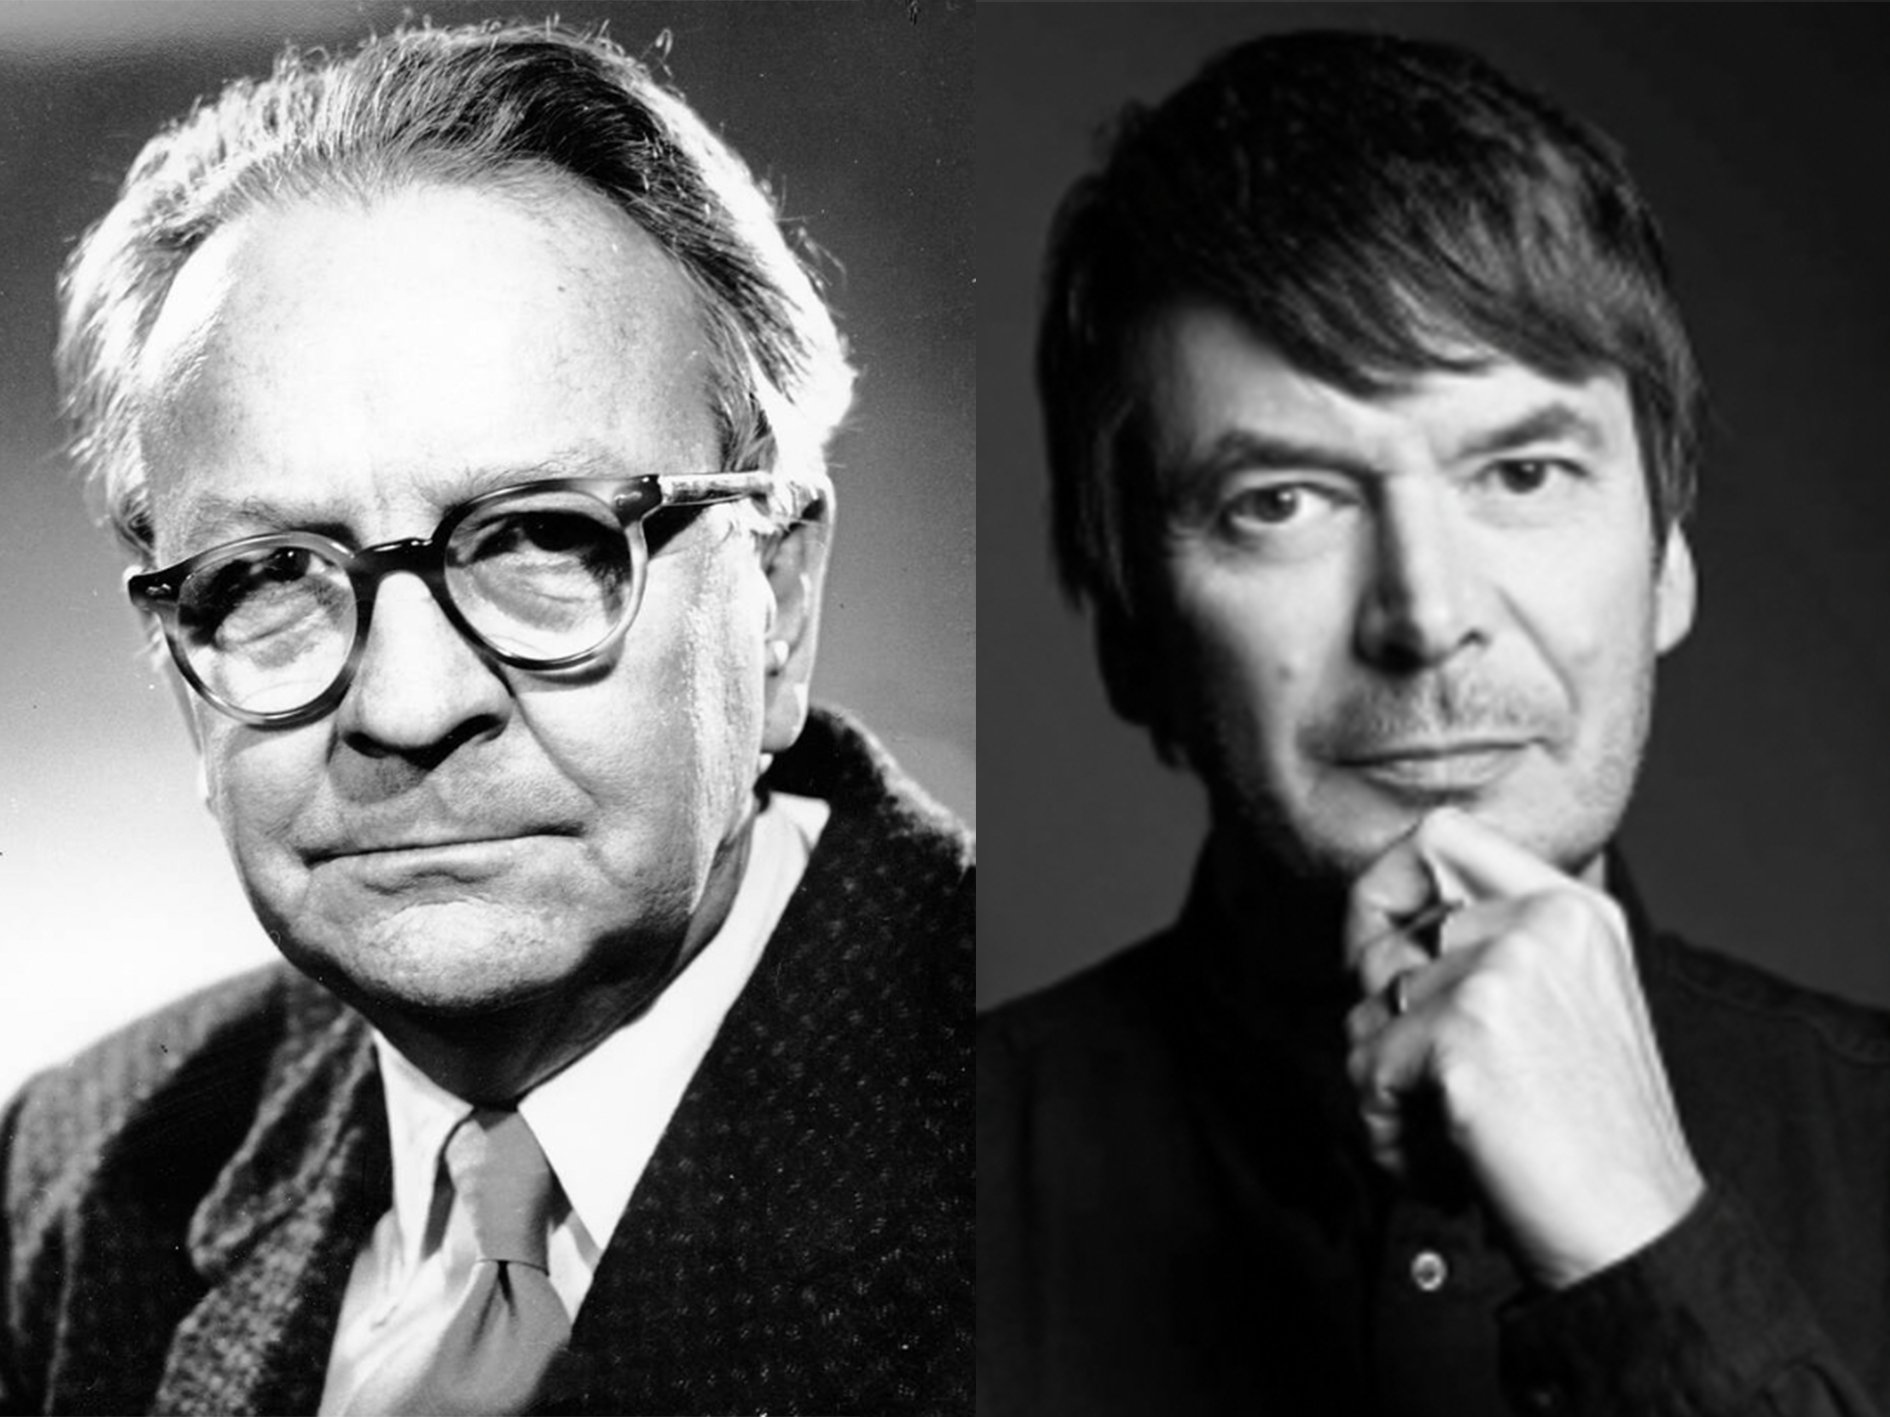 IT'S A CRIME- Raymond Chandler and Ian Rankin – a comparison of style